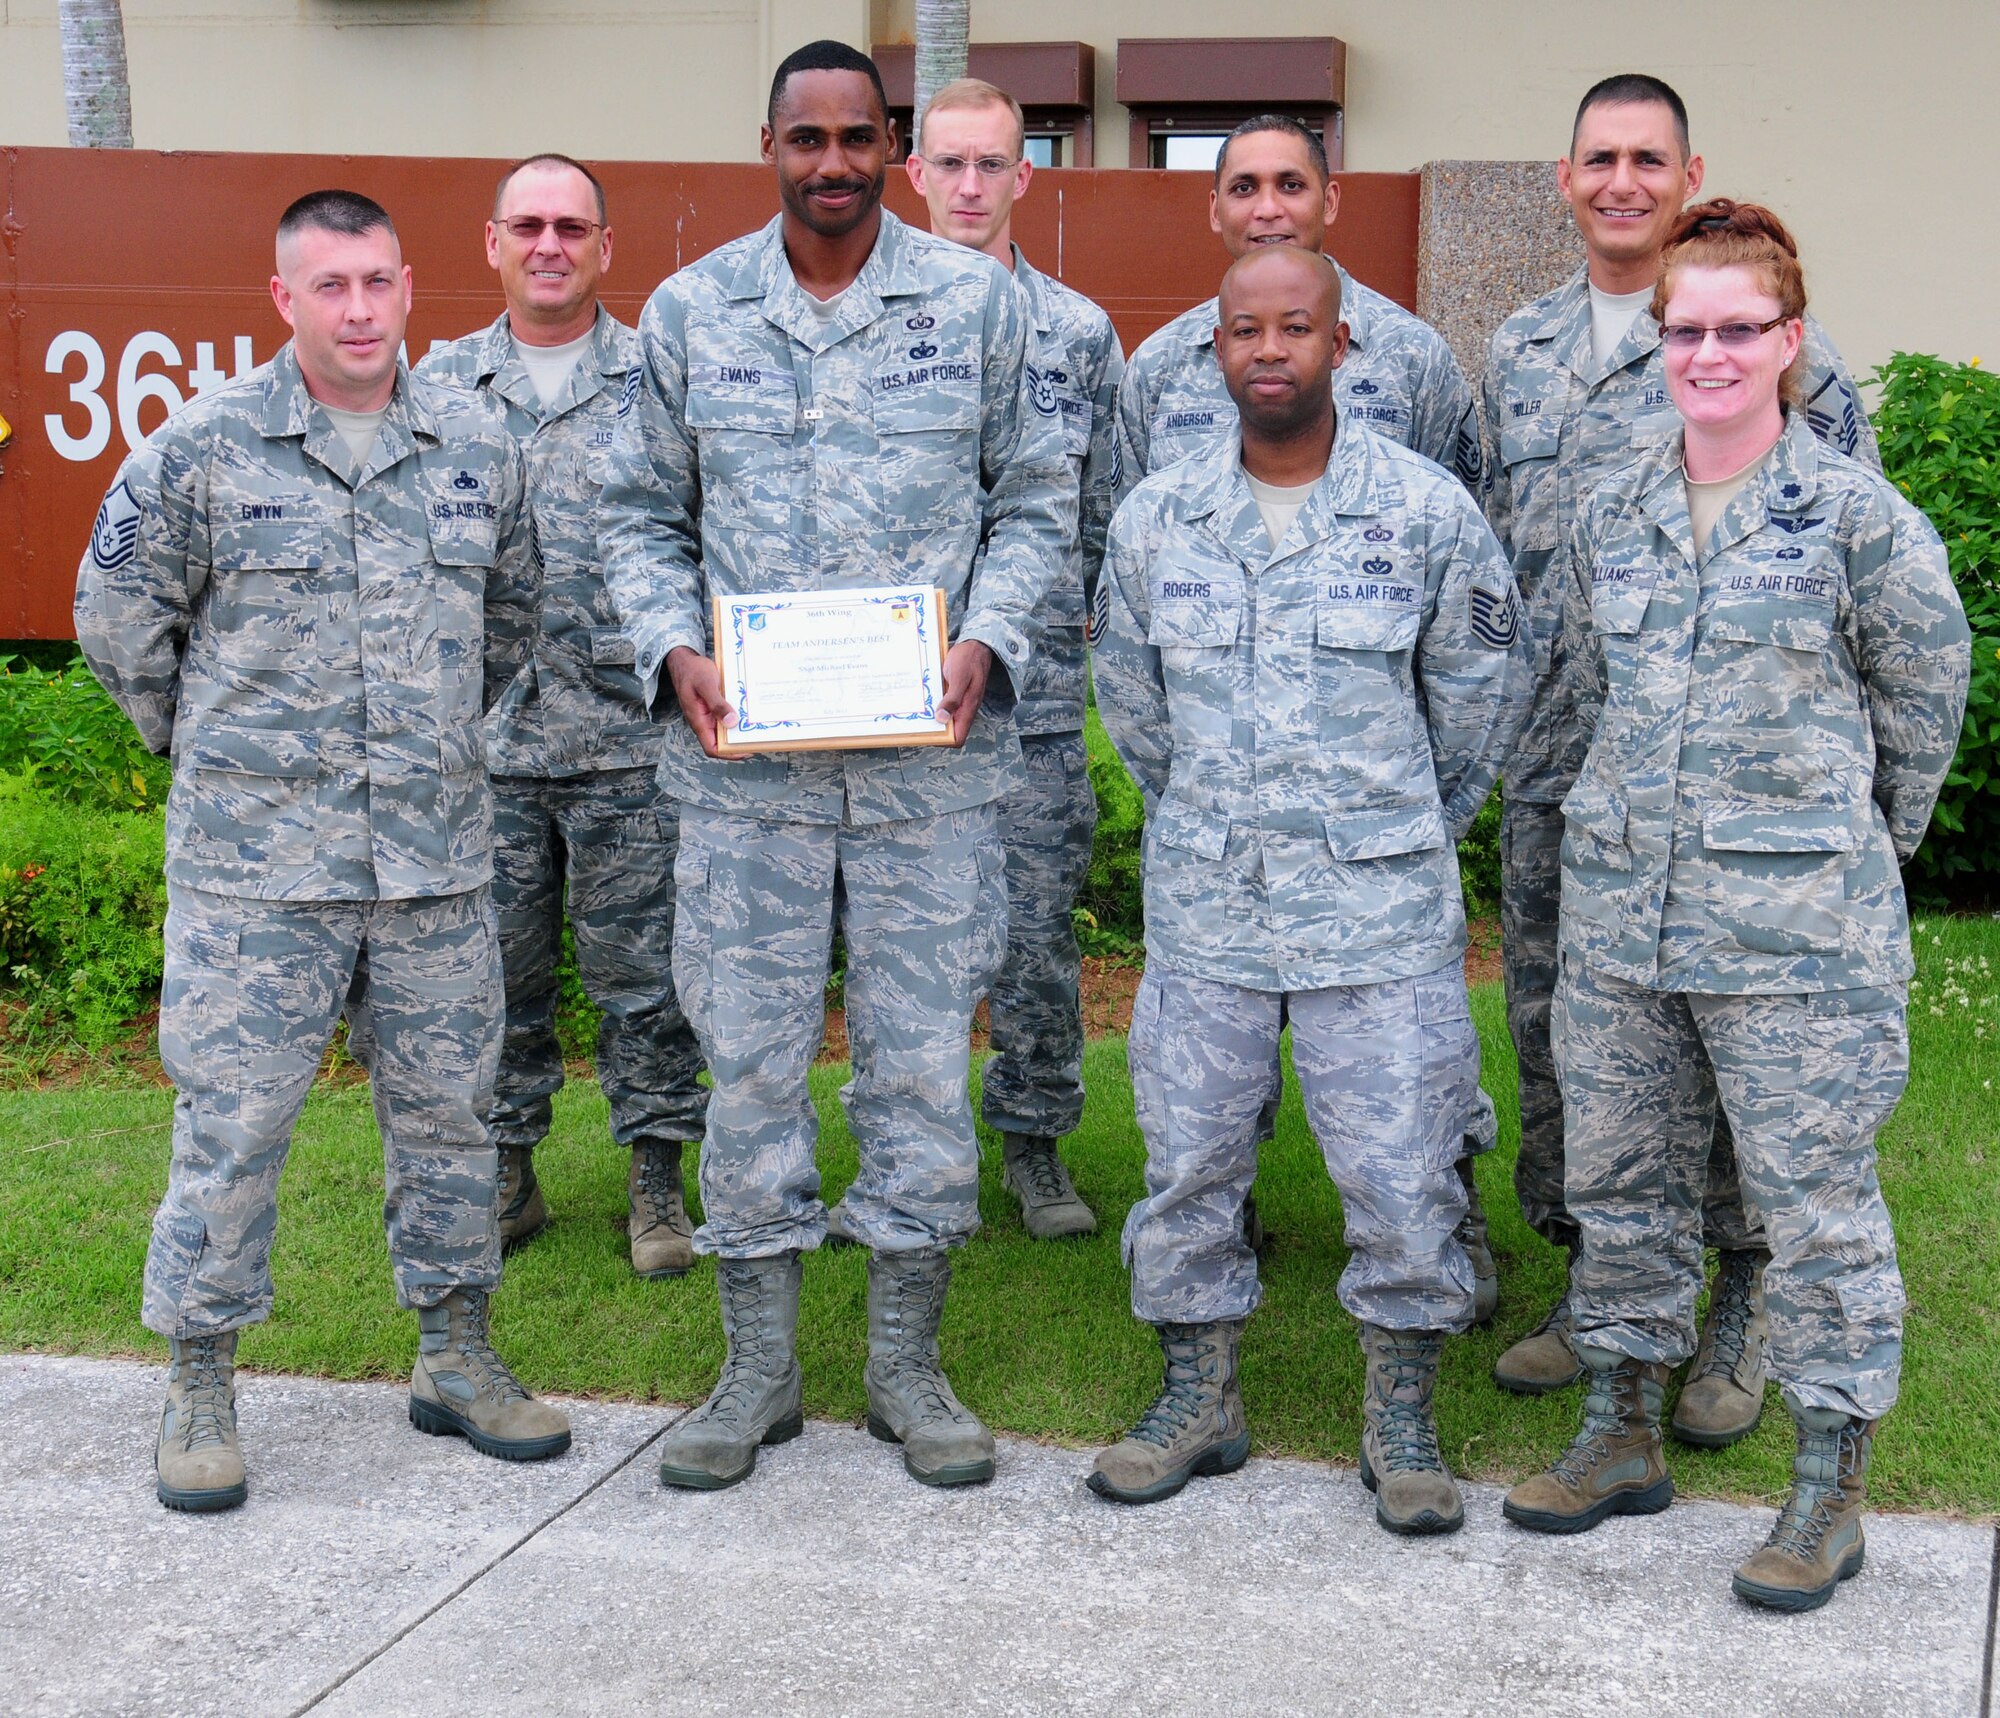 ANDERSEN AIR FORCE BASE, Guam—Staff Sgt. Michael Evans, 36th Wing ground safety apprentice, was awarded Team Andersen’s Best July 19. Team Andersen's Best is a recognition program which highlights a top performer from the 36th Wing. Each week, supervisors nominate a member of their team for outstanding performance and the wing commander presents the selected Airman/civilian with an award. To nominate your Airman/civilian for Andersen's Best, contact your unit chief or superintendent explaining their accomplishments. (U.S. Air Force photo by Senior Airman Benjamin Wiseman/Released)